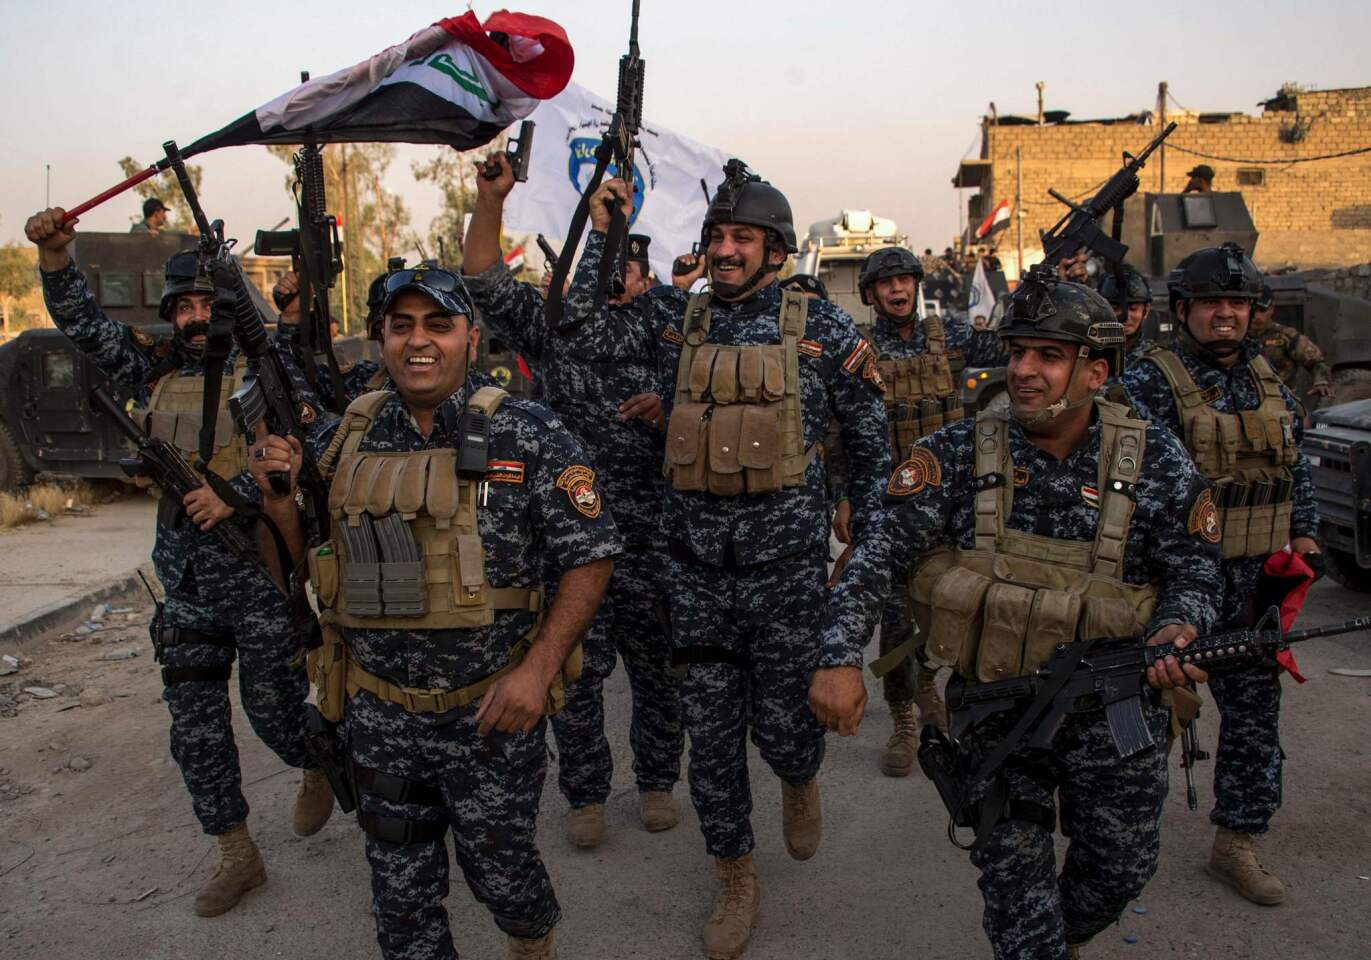 Members of the Iraqi federal police forces celebrate in the Old City of Mosul on July 10, 2017, after the government's announcement of the "liberation" of the embattled city from Islamic State fighters.